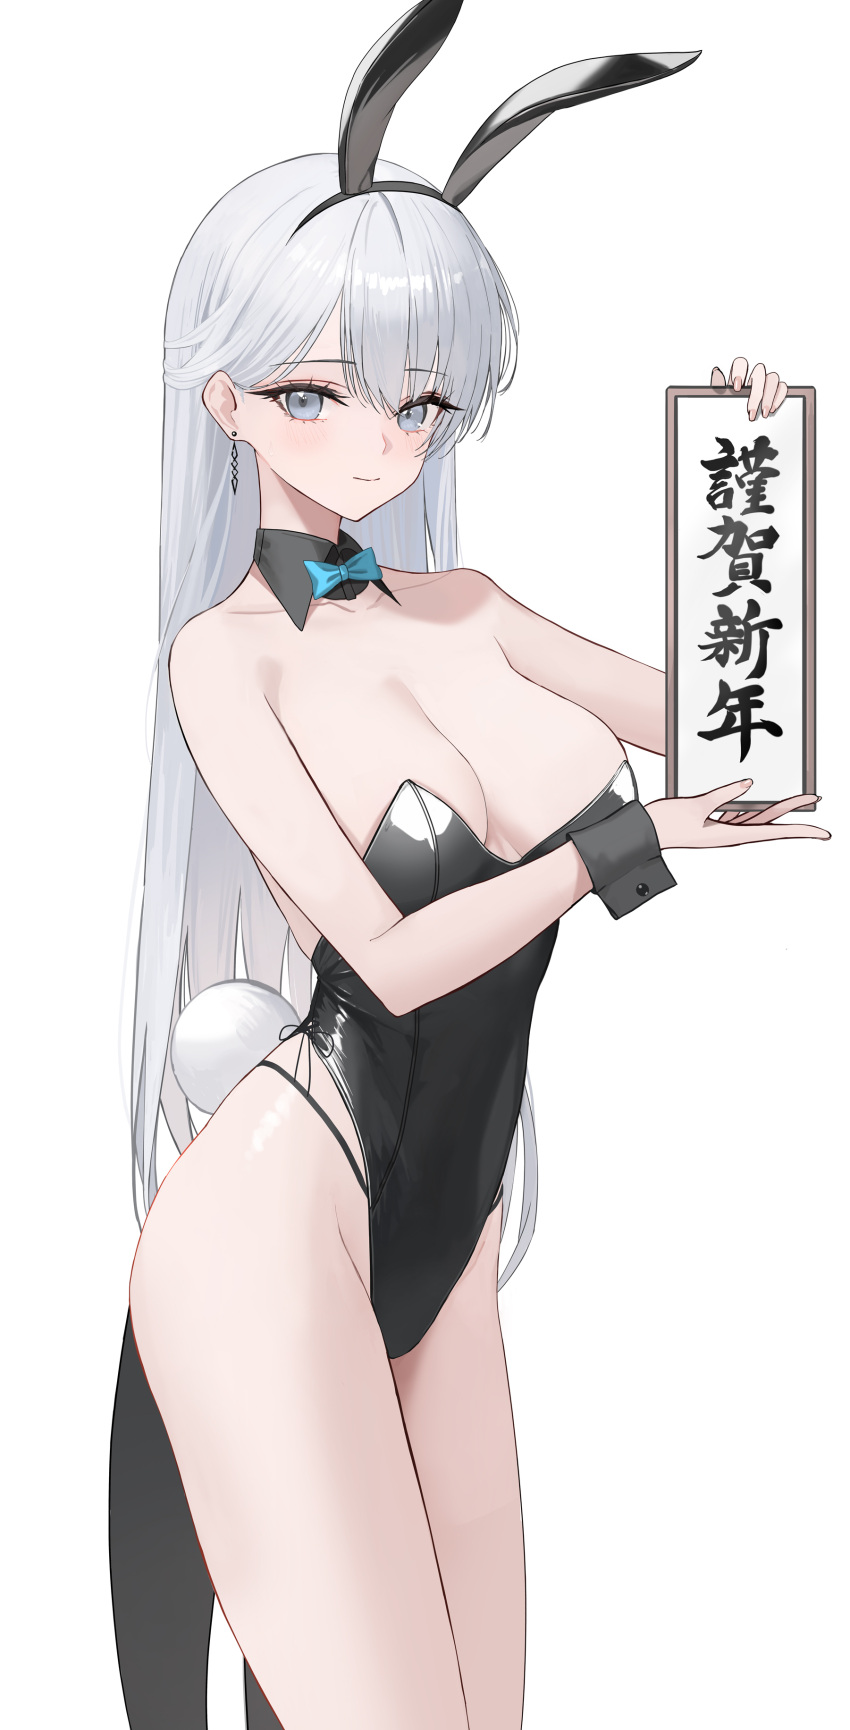 1girls absurd_res absurdres arms_up bare_armpits bare_arms bare_ass bare_butt bare_chest bare_hands bare_hips bare_legs bare_shoulders bare_skin bare_thighs black_bunny_ears black_bunnygirl_costume black_bunnysuit black_collar black_wrist_cuffs blue_bowtie blue_eyes blue_eyes_female blush blush blushing_female bowtie breasts bunny_ears bunny_tail bunnygirl bunnygirl_outfit cleavage collar collarbone curvy curvy_ass curvy_body curvy_female curvy_figure curvy_hips curvy_thighs dot_nose earrings elbows exposed exposed_armpits exposed_arms exposed_legs exposed_shoulders exposed_thighs eyebrows_visible_through_hair female female_focus female_only fingernails fingers groin hair_between_eyes half_naked hands_up high_resolution highres hourglass_figure japanese_text legs light-skinned_female light_skin long_hair looking_at_viewer medium_breasts naked naked_female nude nude_female original original_art original_artwork original_character original_characters rella2930 rikui_(rella2930) shoulders sideboob simple_background slender_body slender_waist slim_girl slim_waist smile smiling smiling_at_viewer solo standing text thick_thighs thighs thin_waist translation_request upper_body v-line white_background white_eyebrows white_hair white_hair_female wide_hips wrist_cuffs